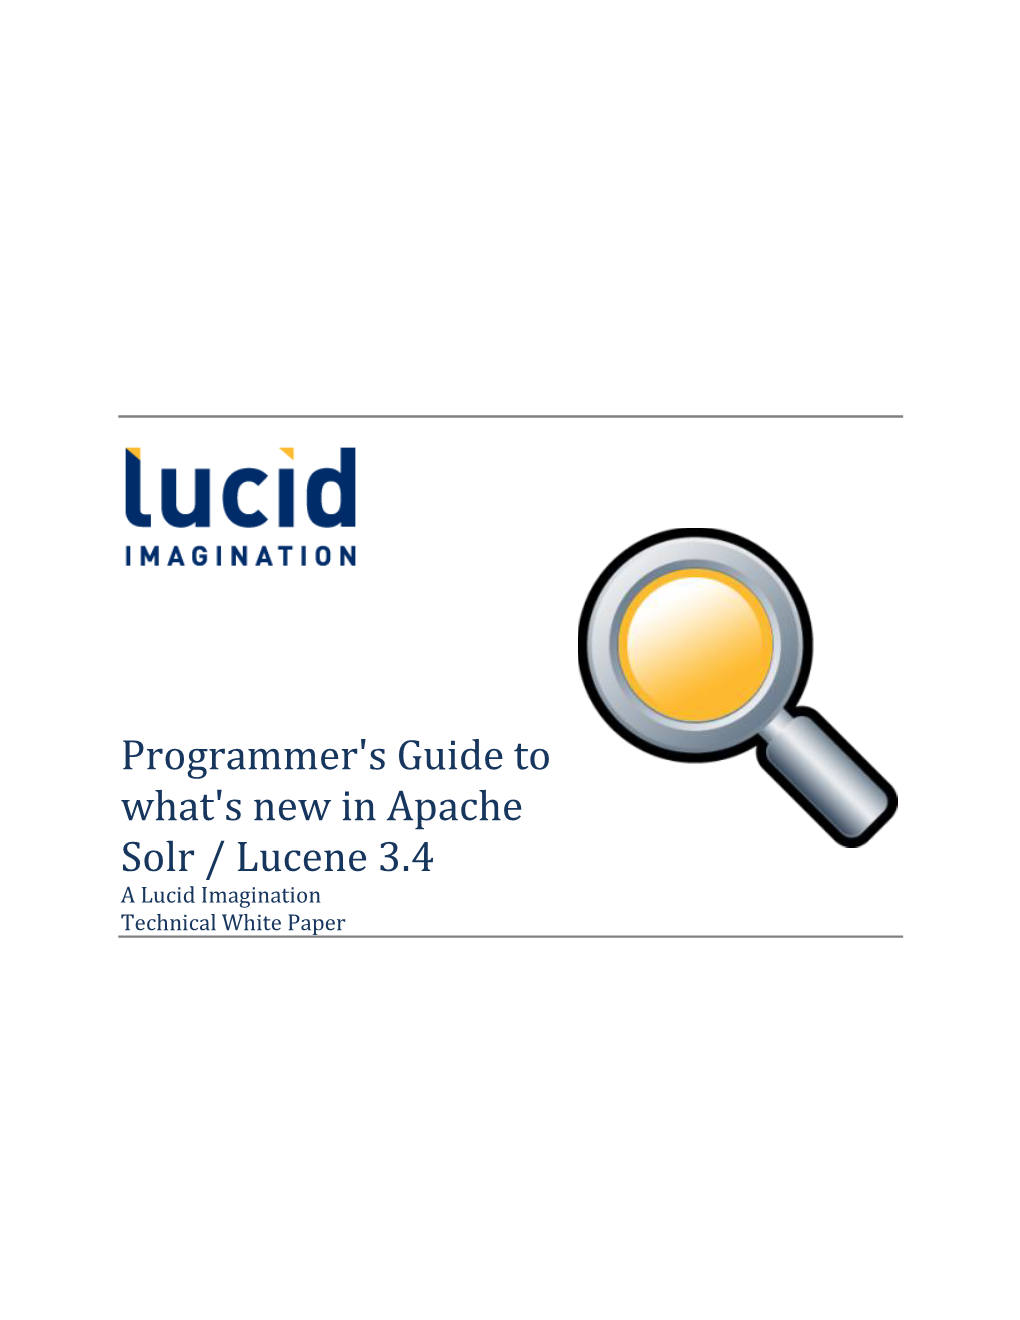 Programmer's Guide to What's New in Apache Solr / Lucene 3.4 a Lucid Imagination Technical White Paper